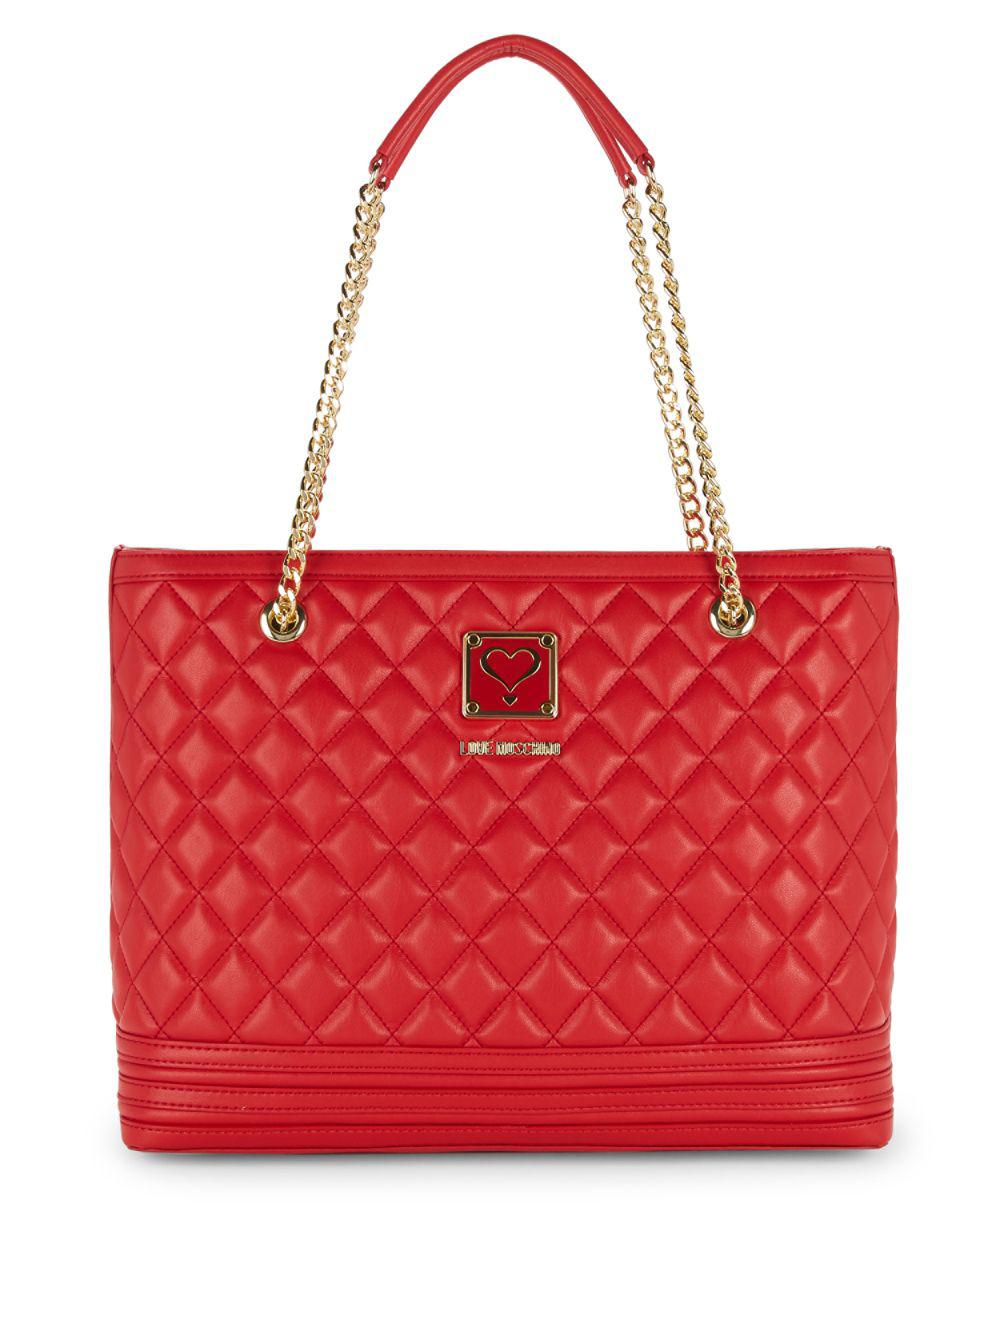 Love Moschino Quilted Chain Strap Shoulder Bag in Red - Lyst